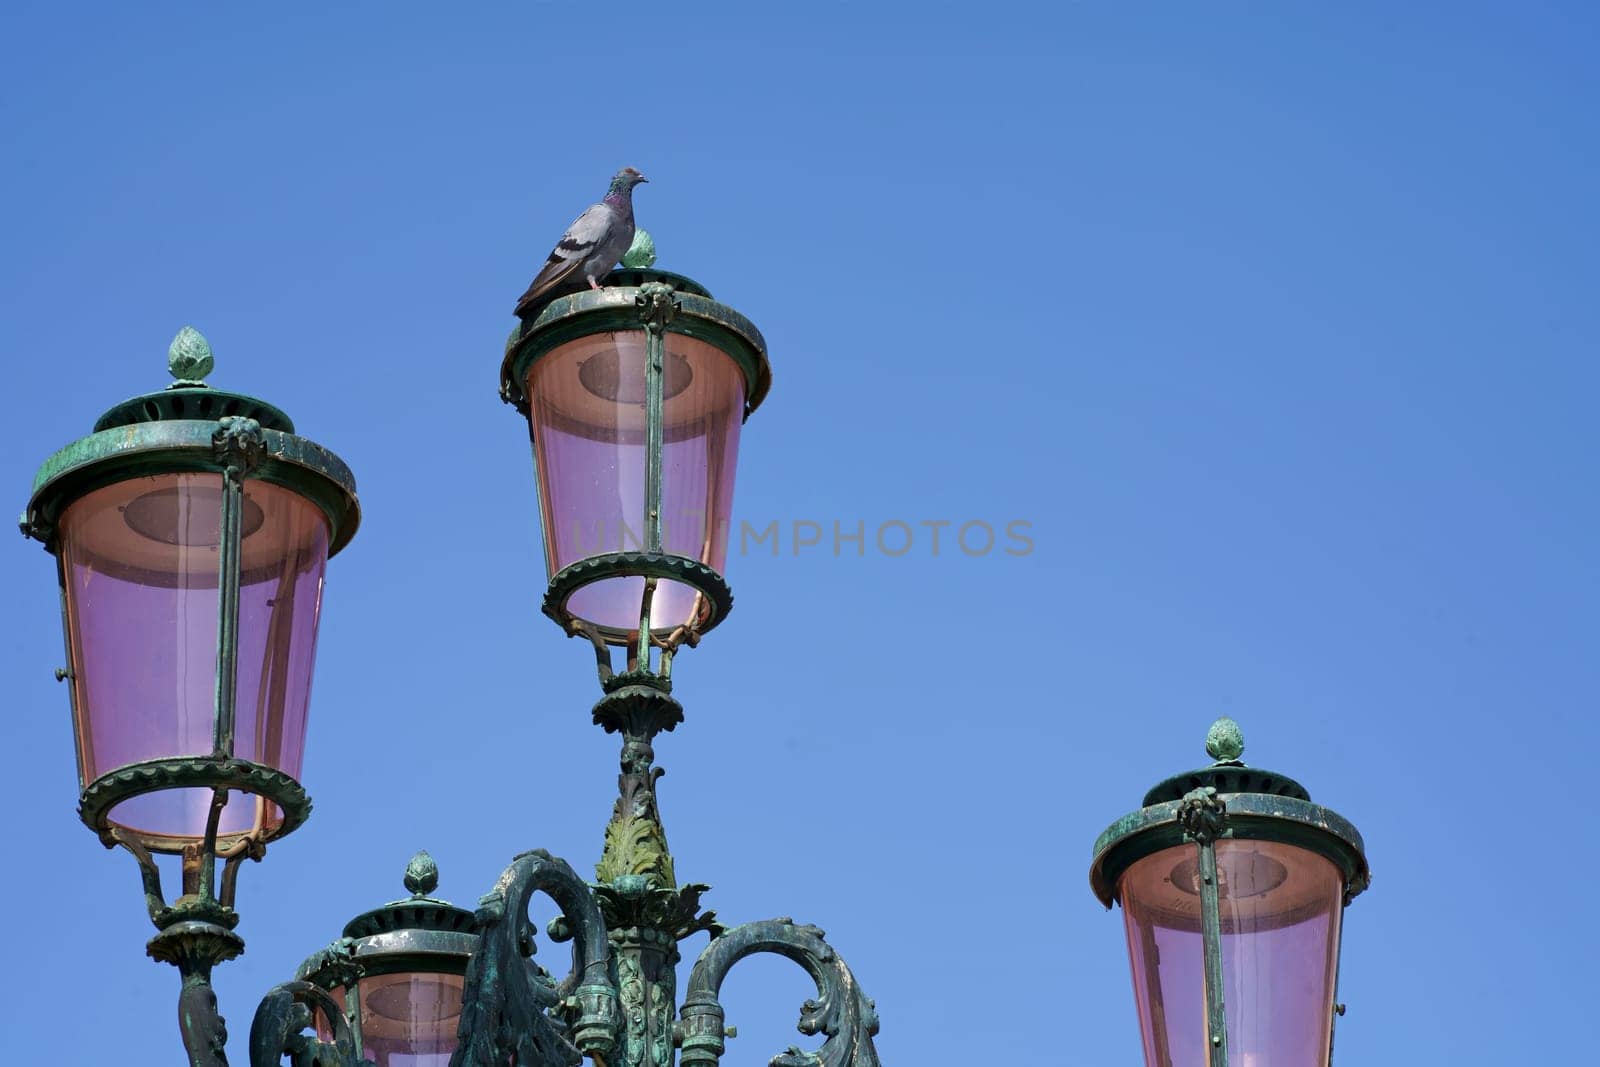 Lantern on the street of Venice. The famous pink lights of Venice. Four lamps with pink glass are on an ornate black metal lamp post by aprilphoto